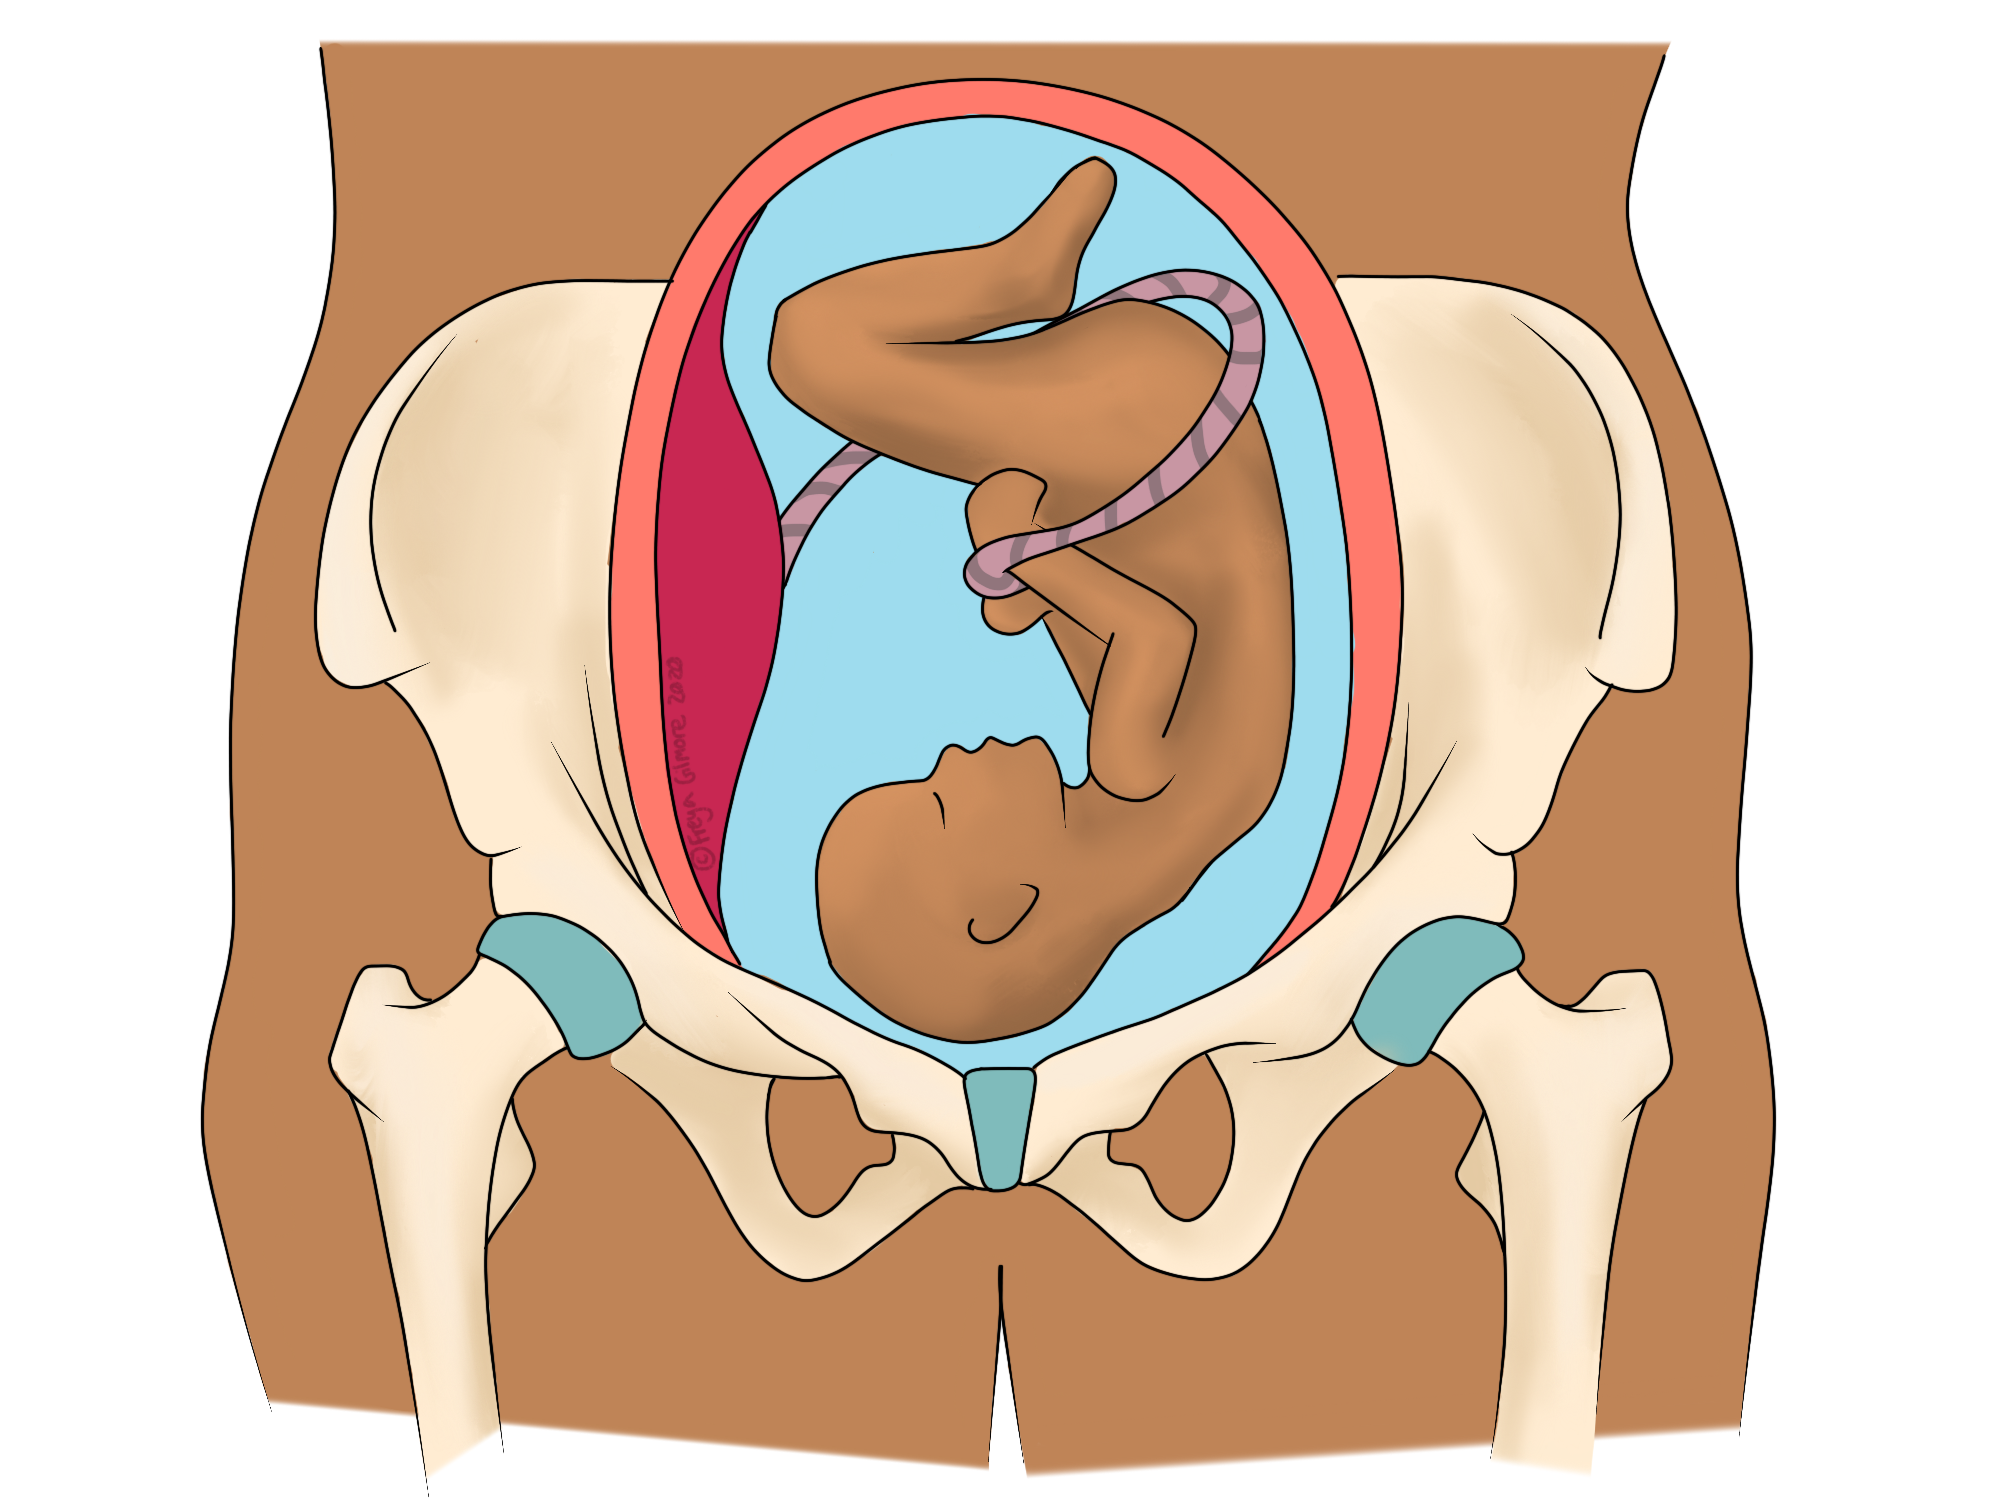 Symphysis Pubis Dysfunction in Pregnancy - The Chiropractic Solution -  Pillars of Health